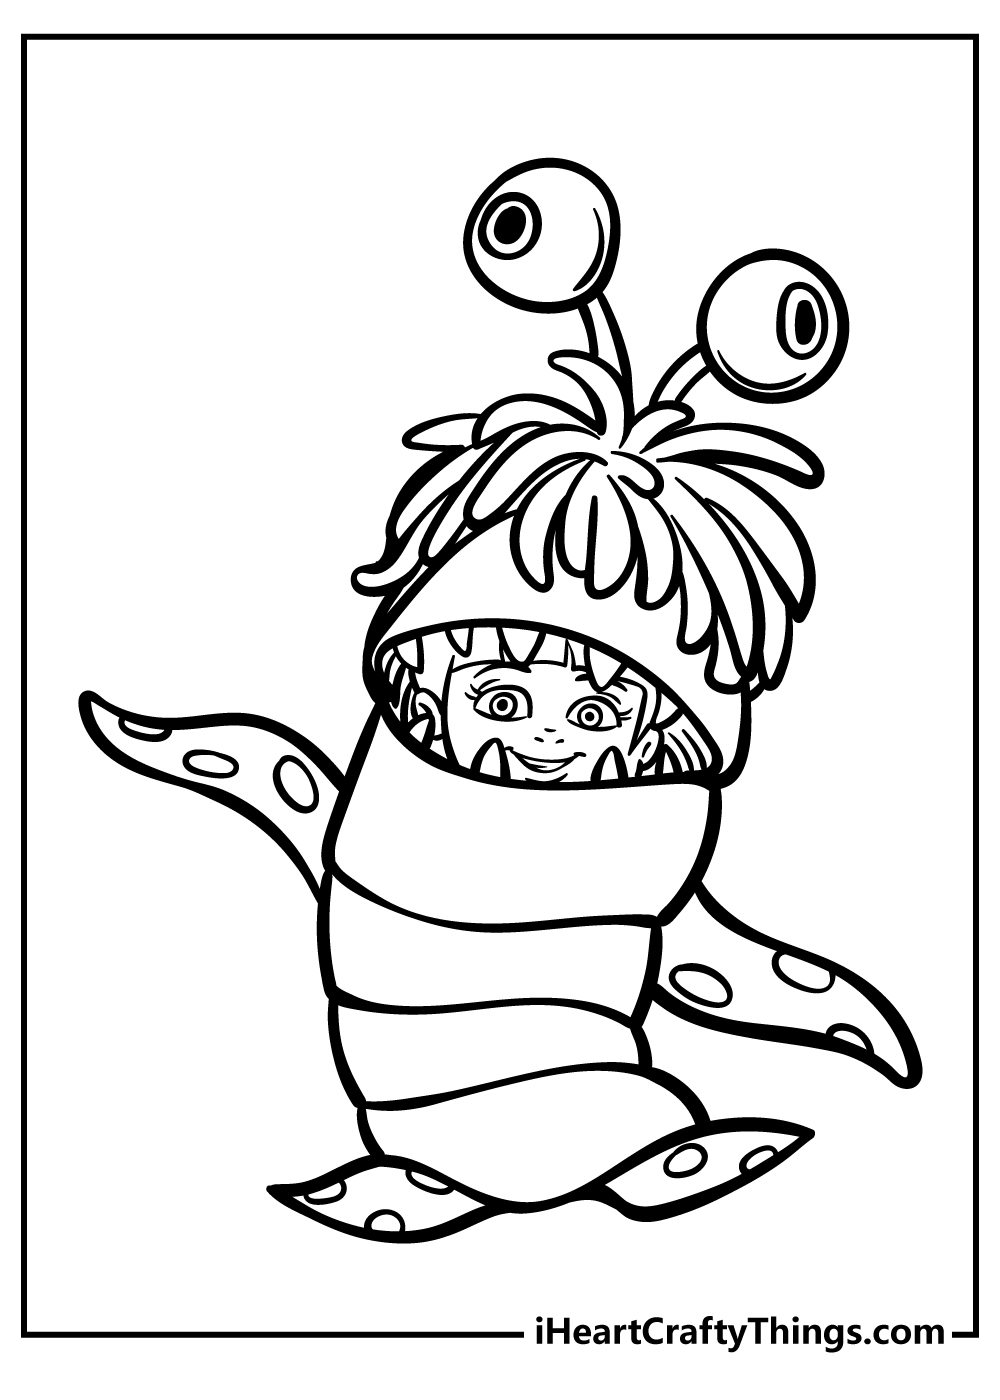 Monsters Inc. Coloring Book for kids free printable